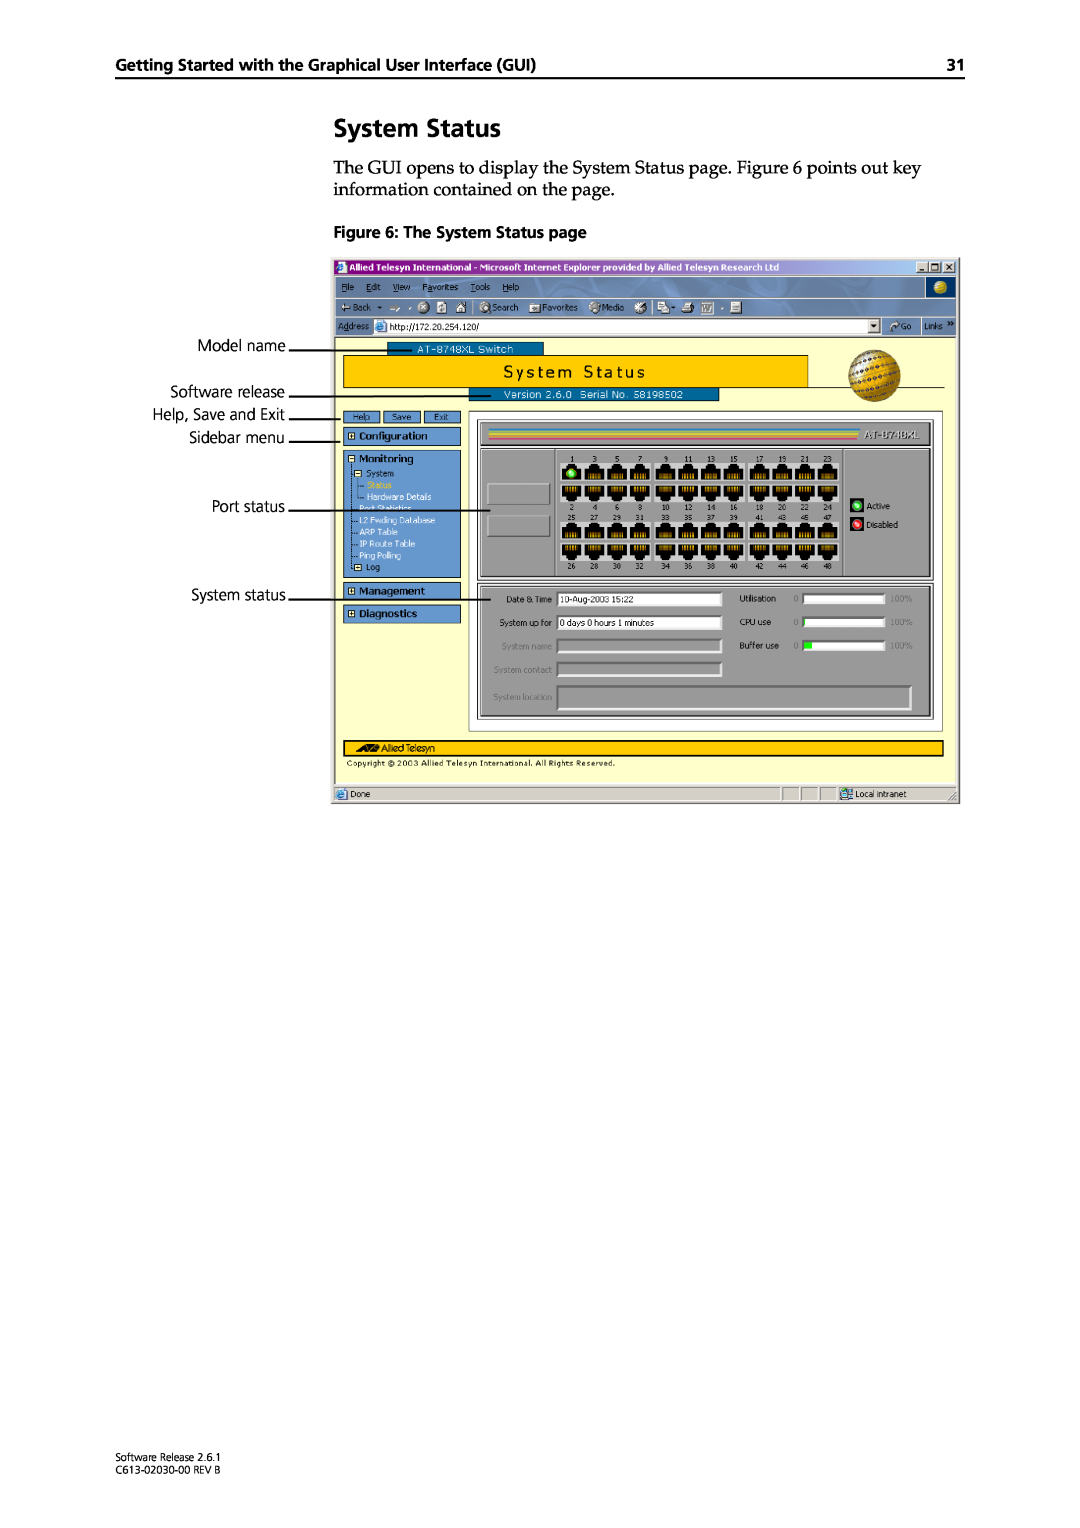 Allied Telesis at-8700xl series switch manual System Status, Getting Started with the Graphical User Interface GUI 